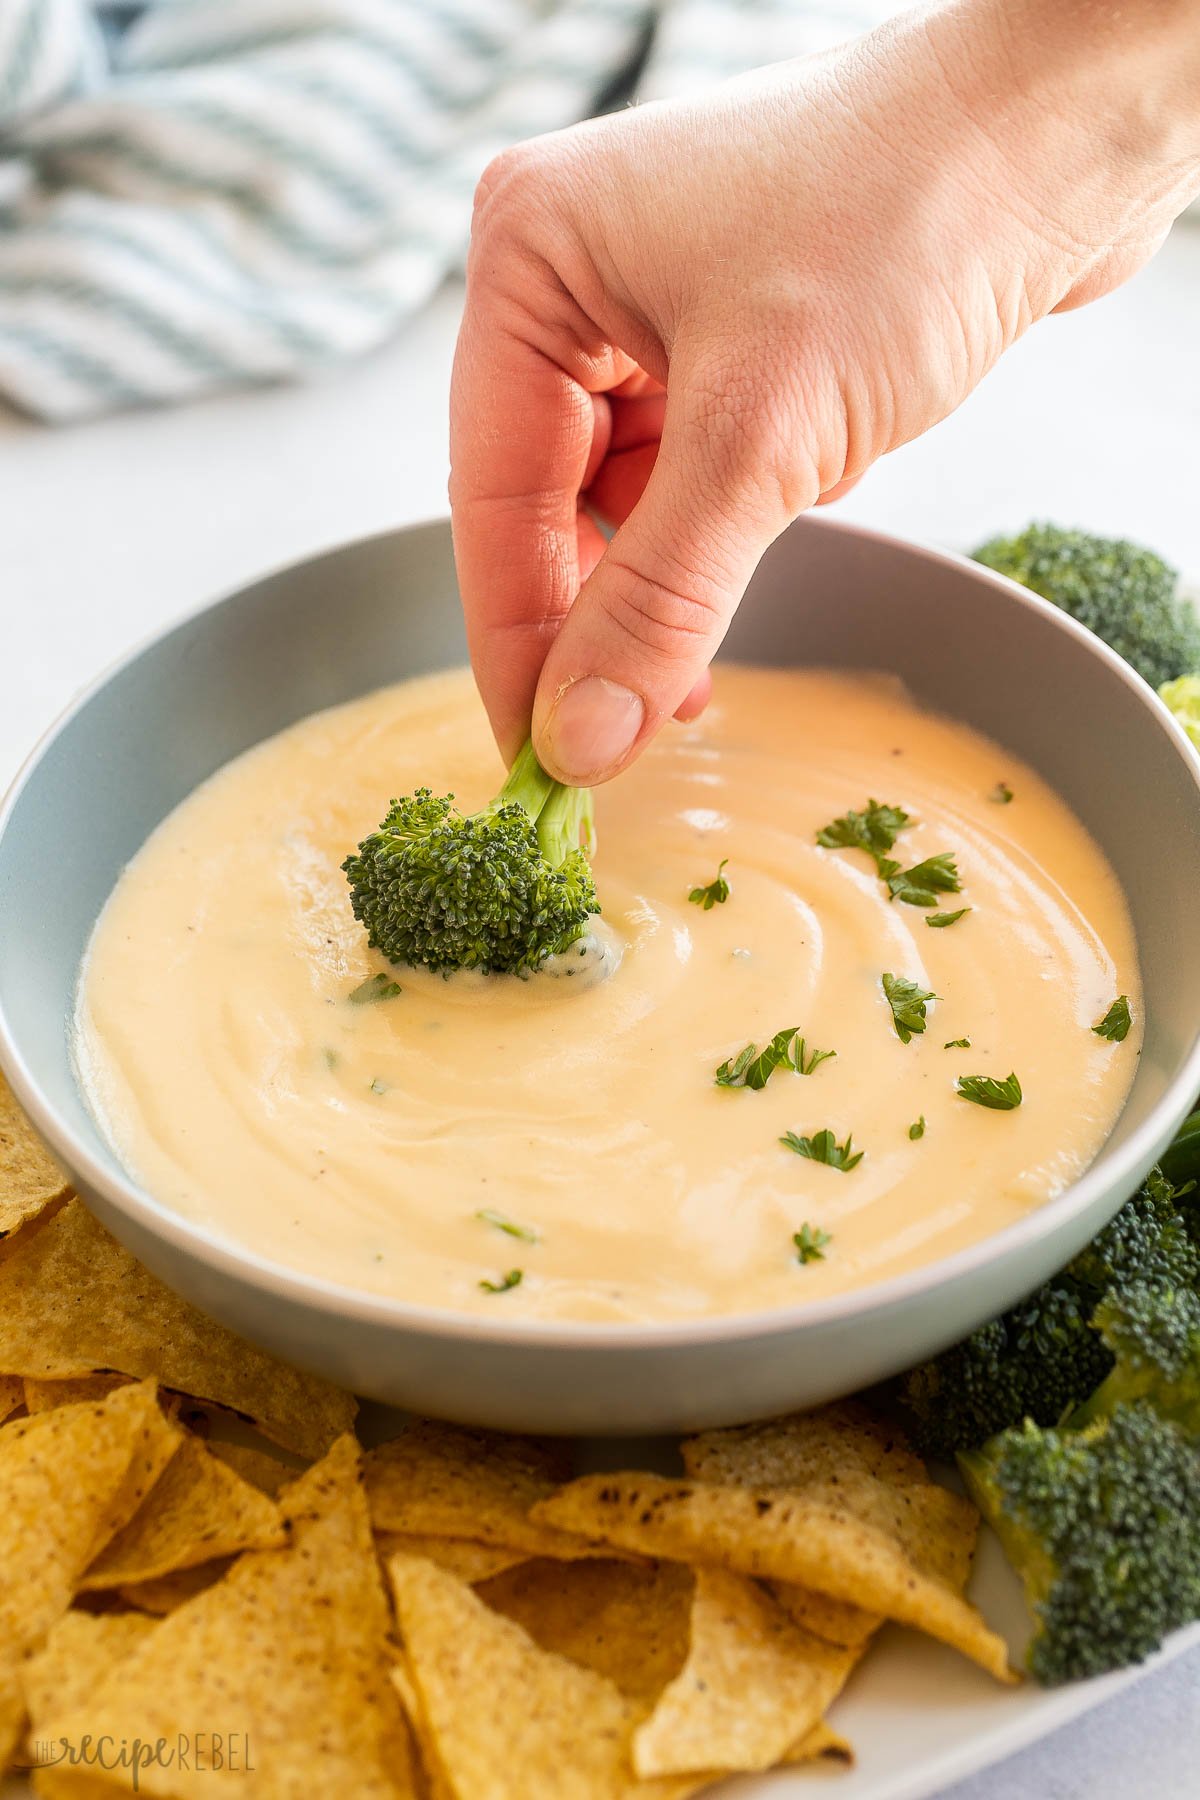 piece of broccoli being dipped into cheese sauce